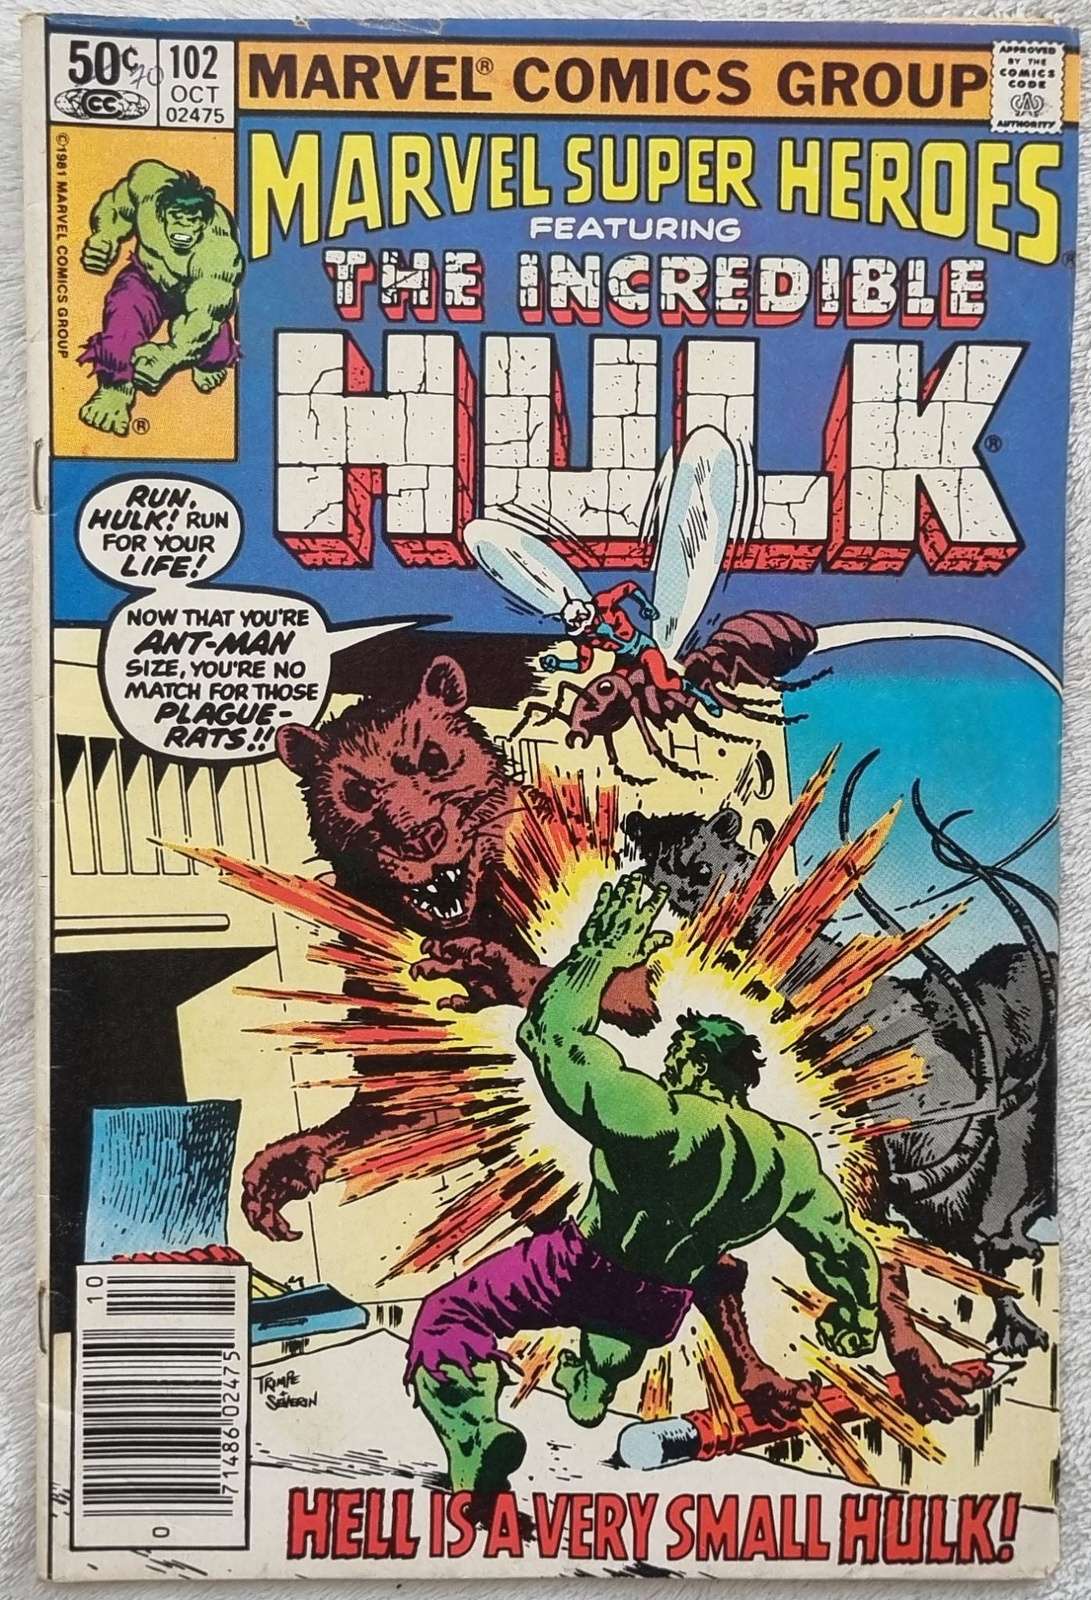 Marvel Superheroes featuring the Incredible Hulk - #102 - VF-